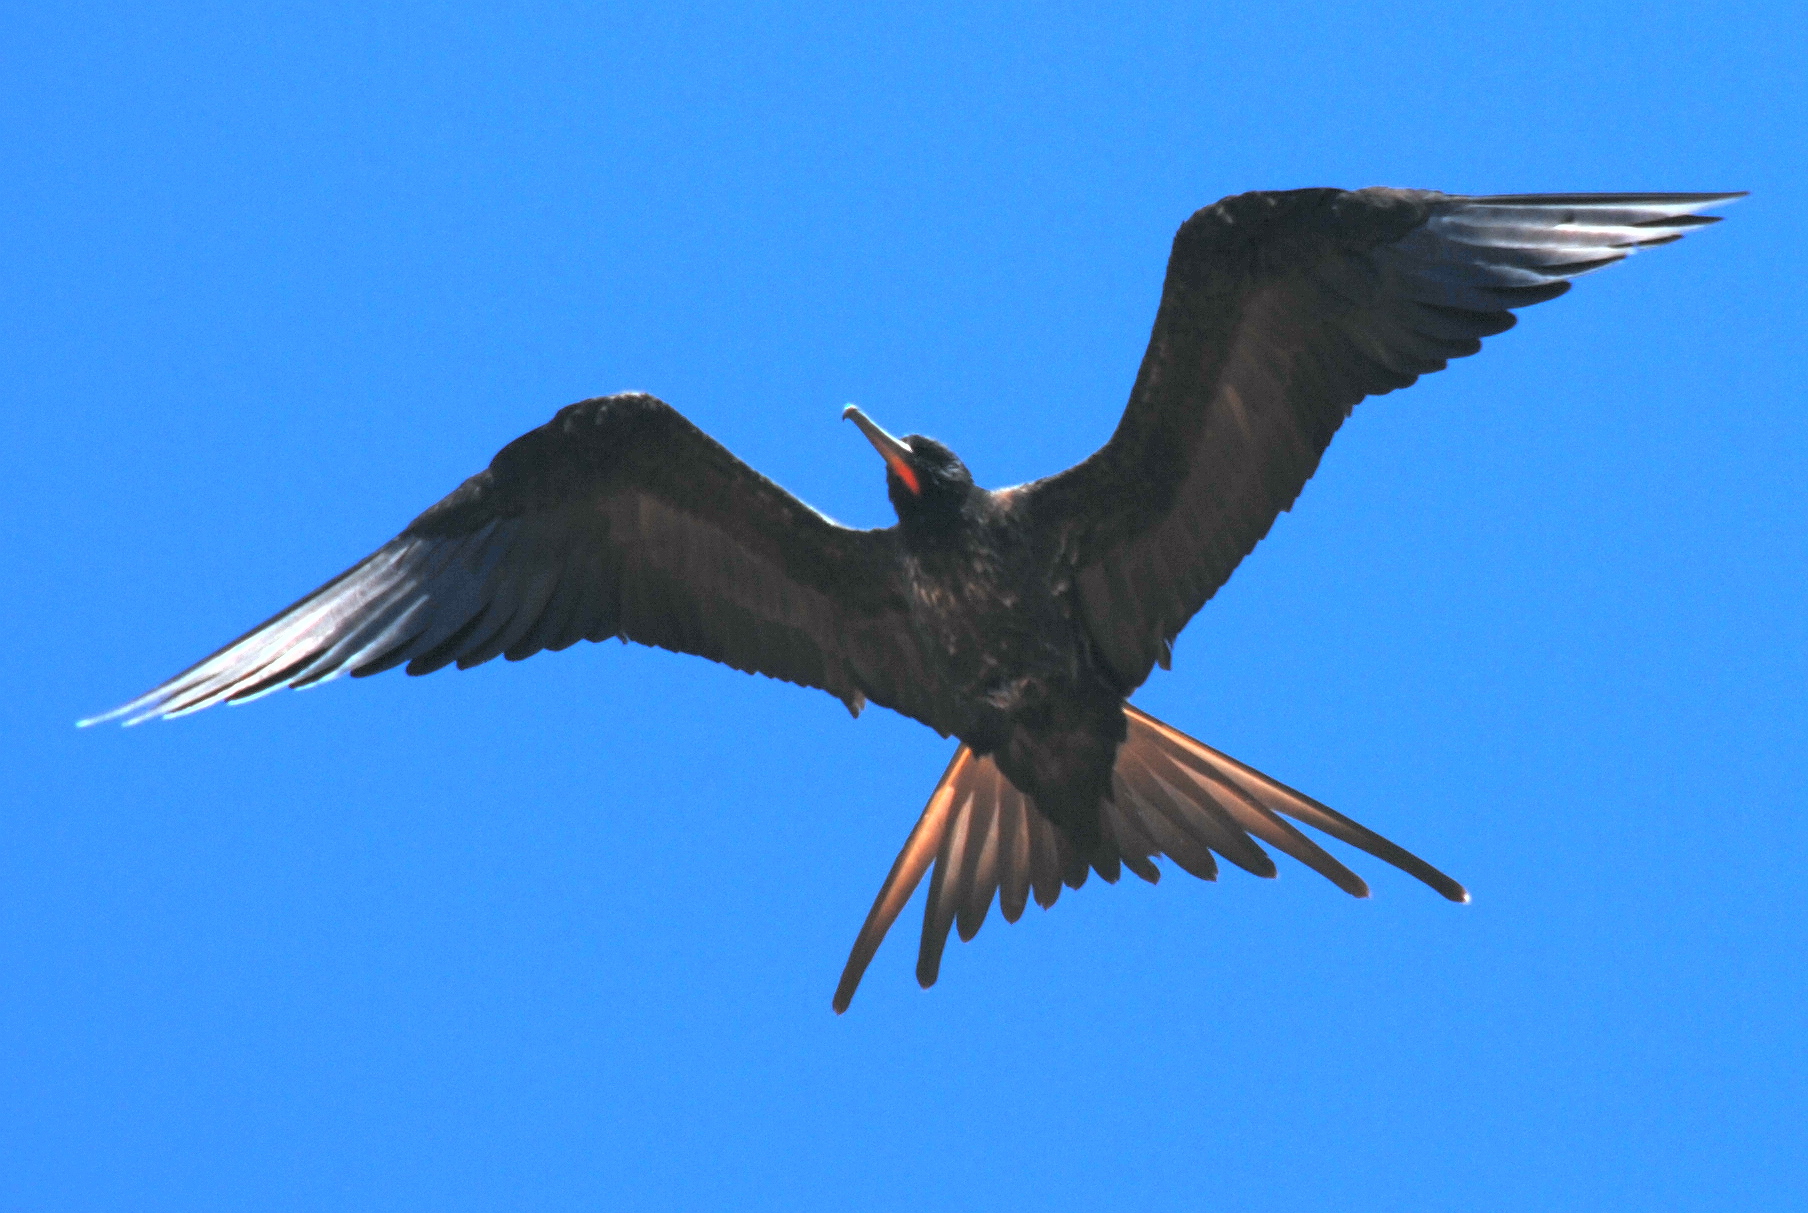 Click picture to see more Magnificent Frigatebirds.